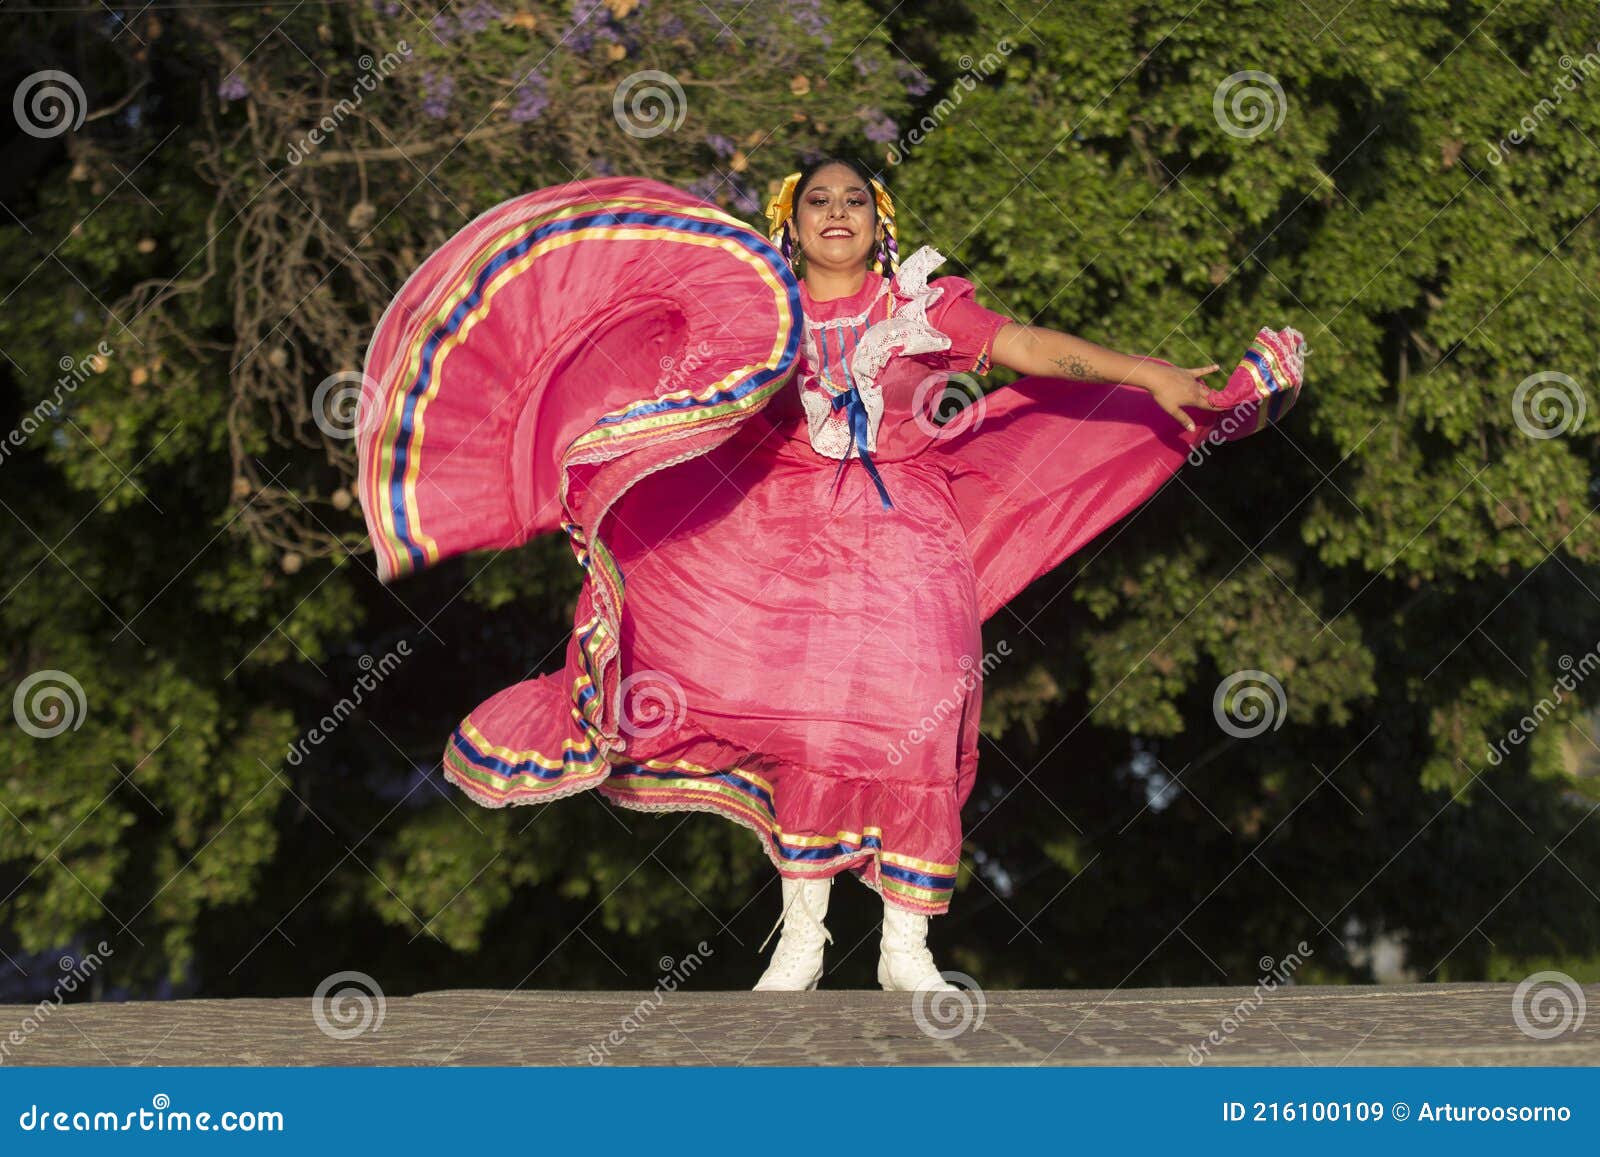 a mexican folk dancer wearing traditional costume